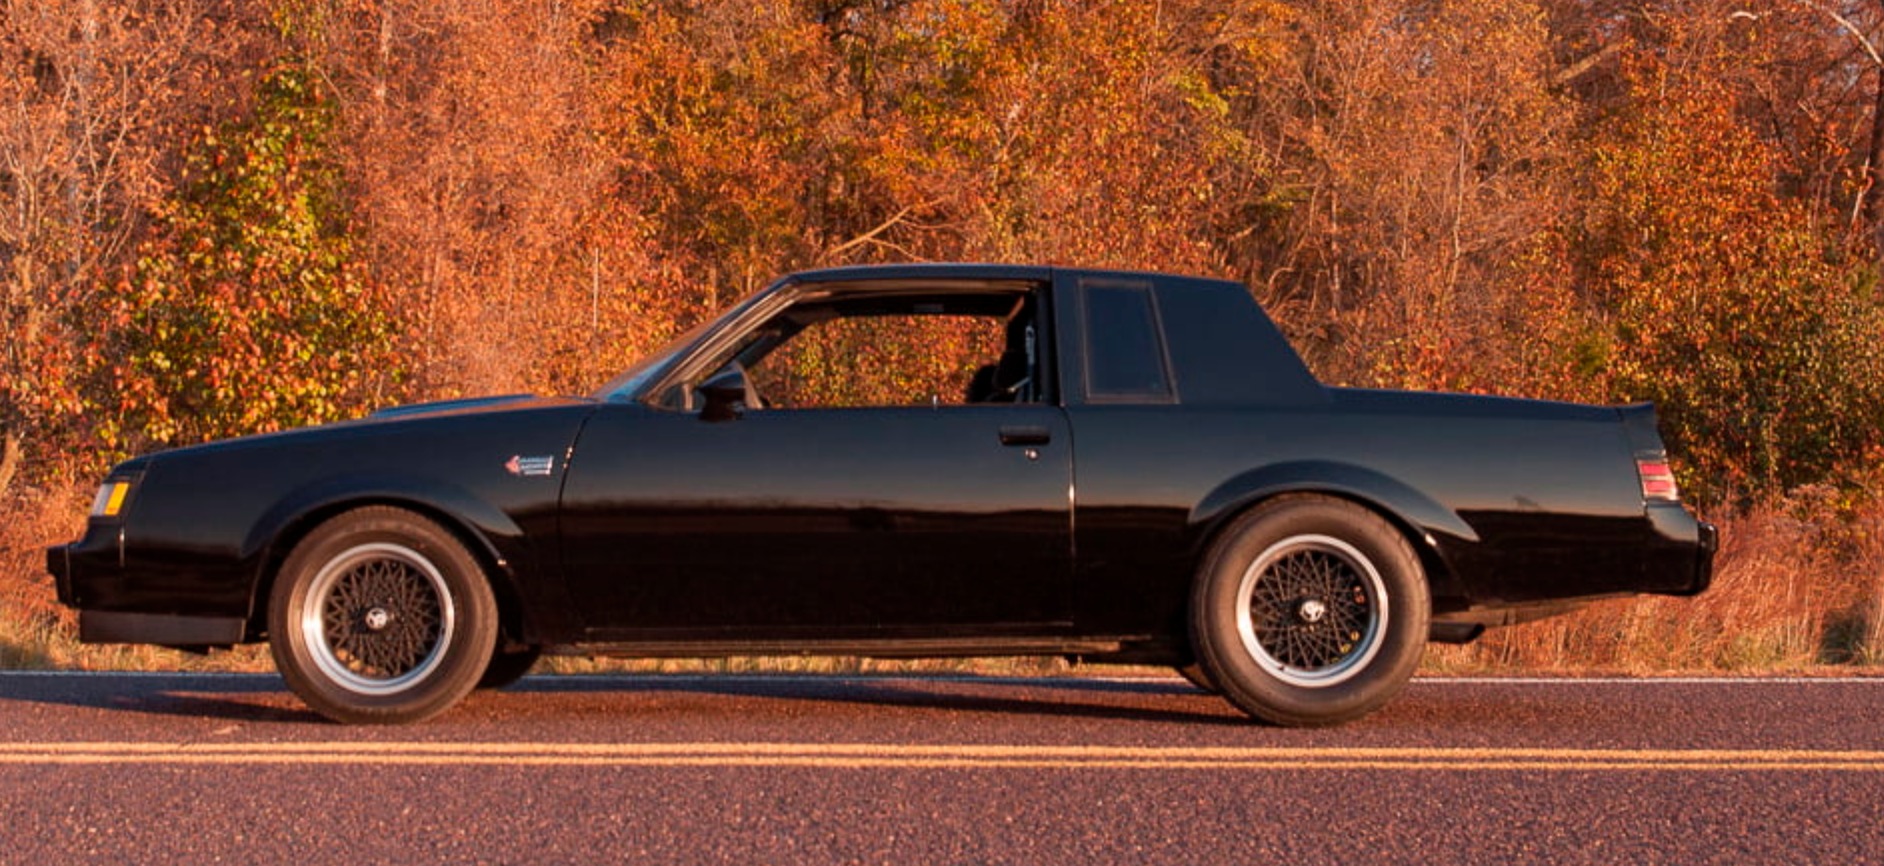 Used 1987 Buick Grand National -LOW MILES-T TOPS-2 OWNER-NICE PAINT-GNX WHEELS- | Mundelein, IL